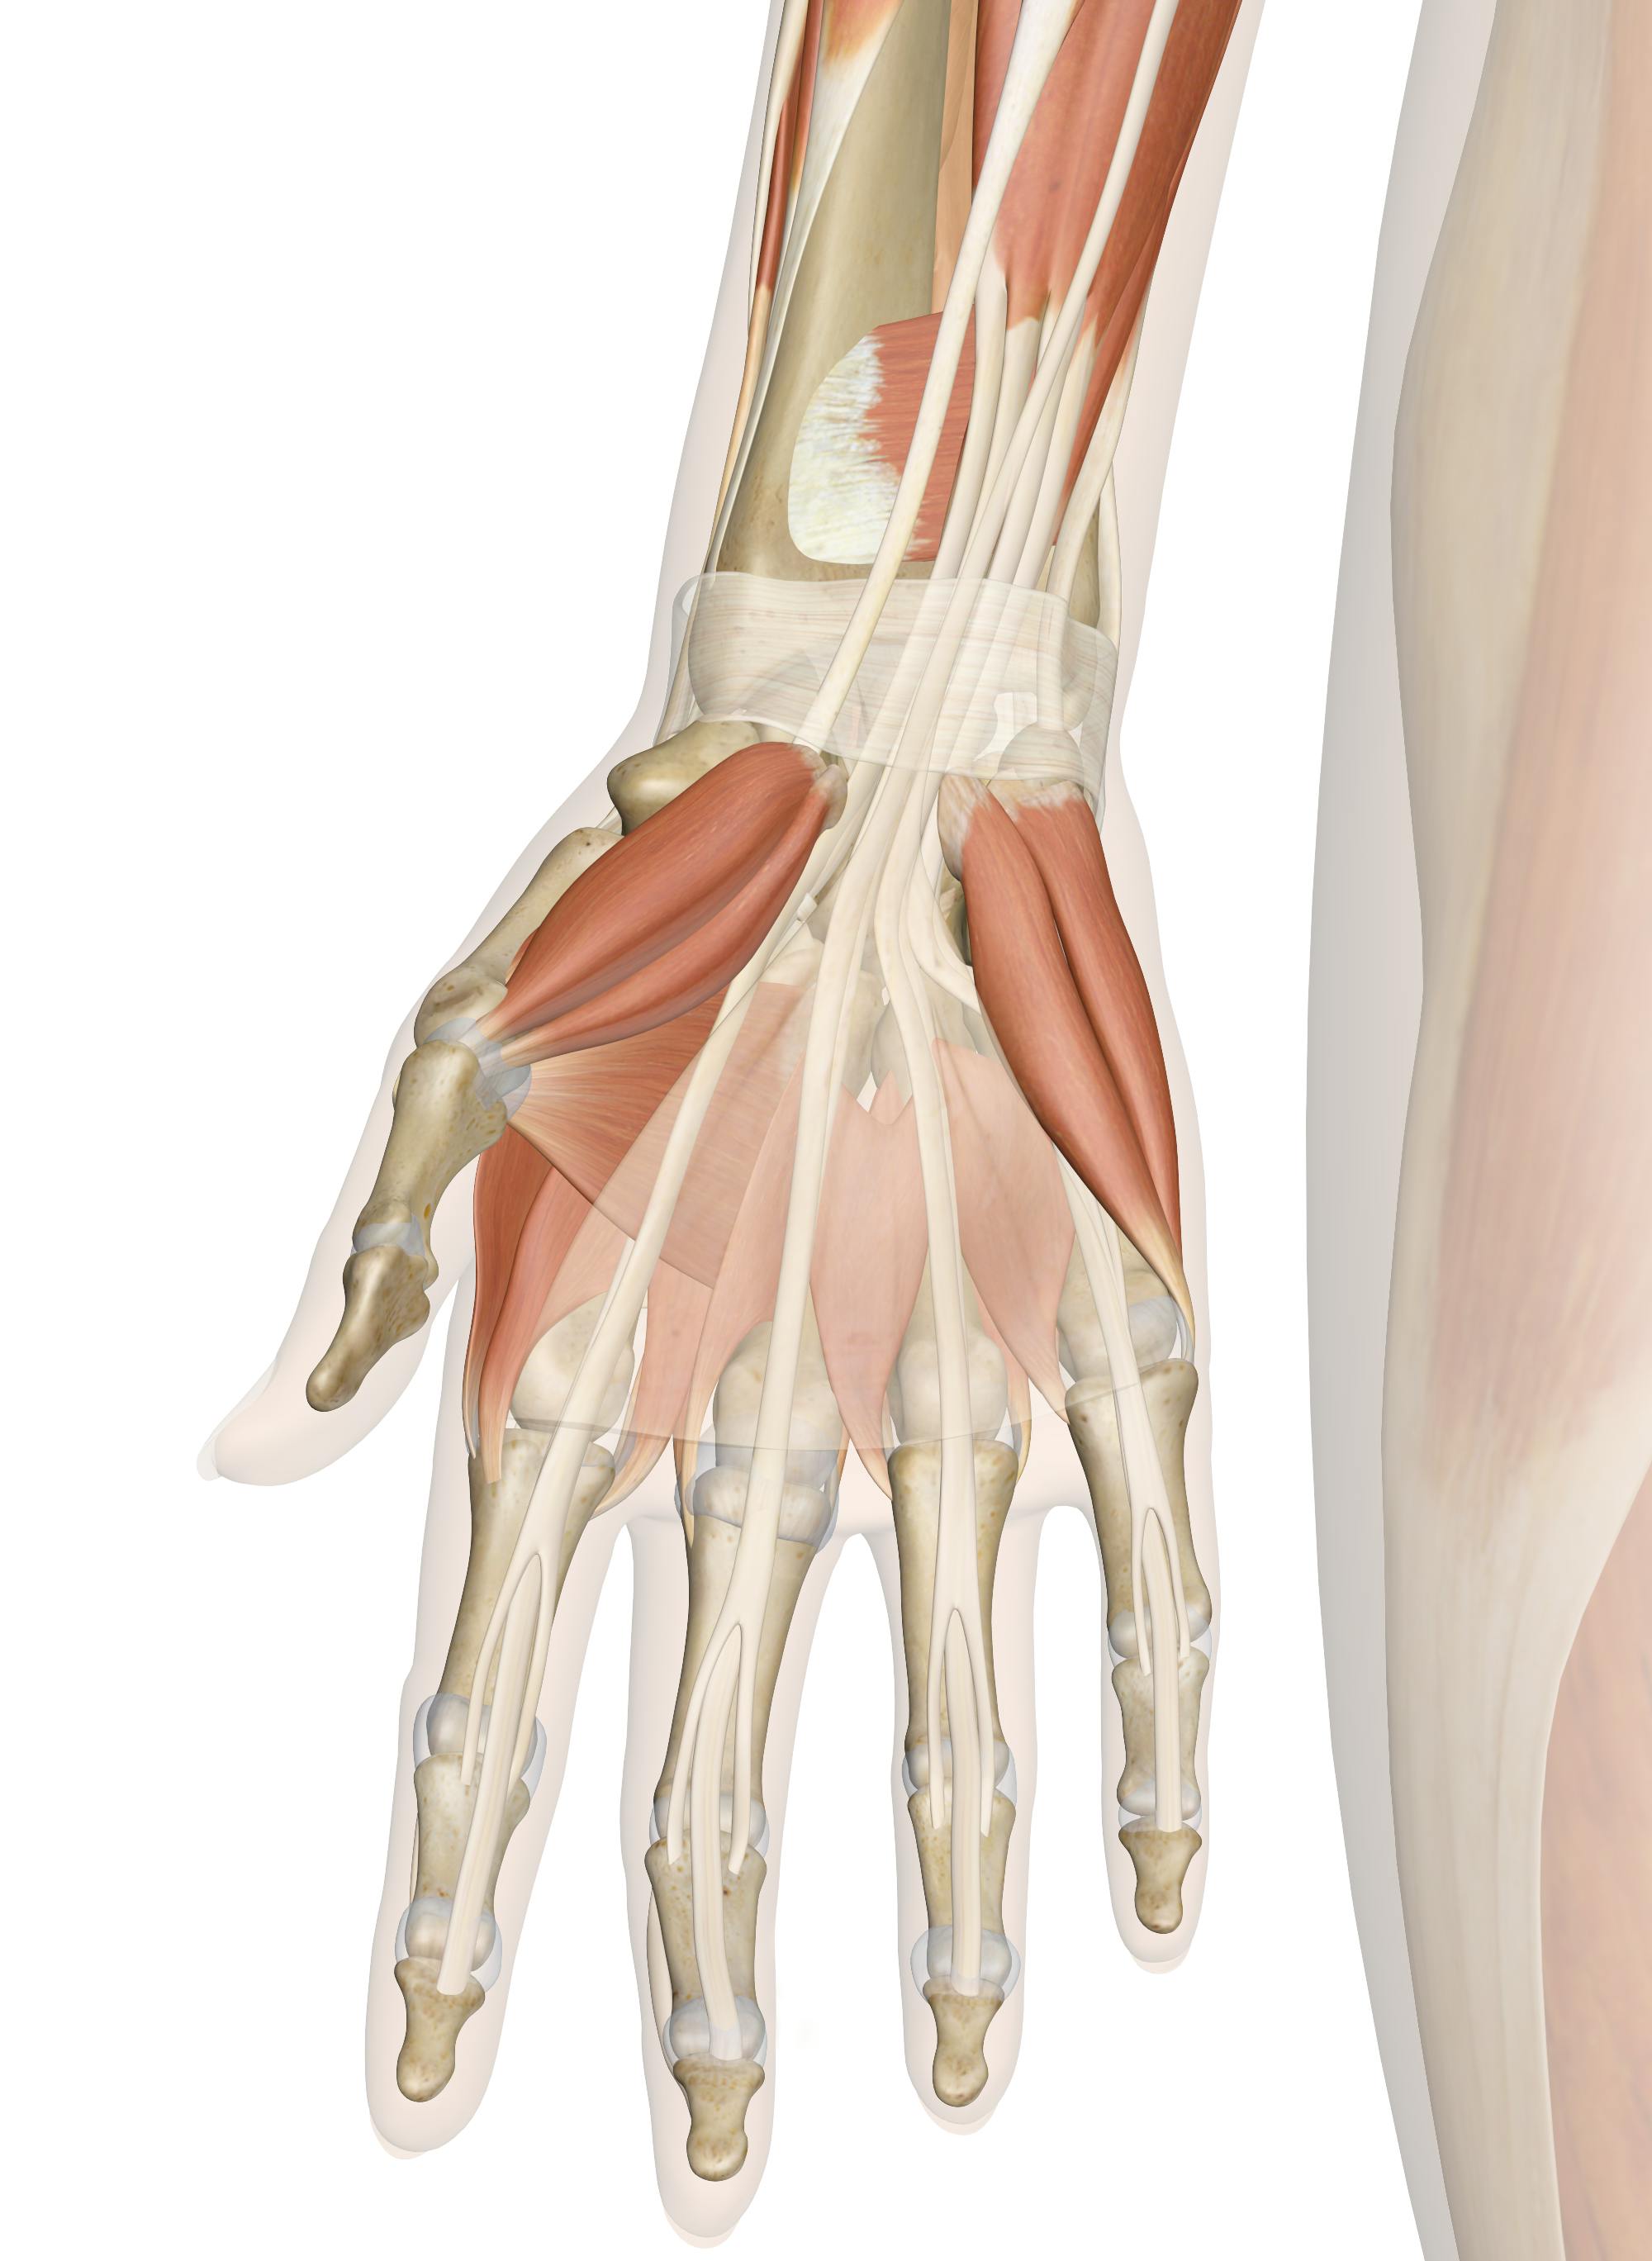 muscular system hand